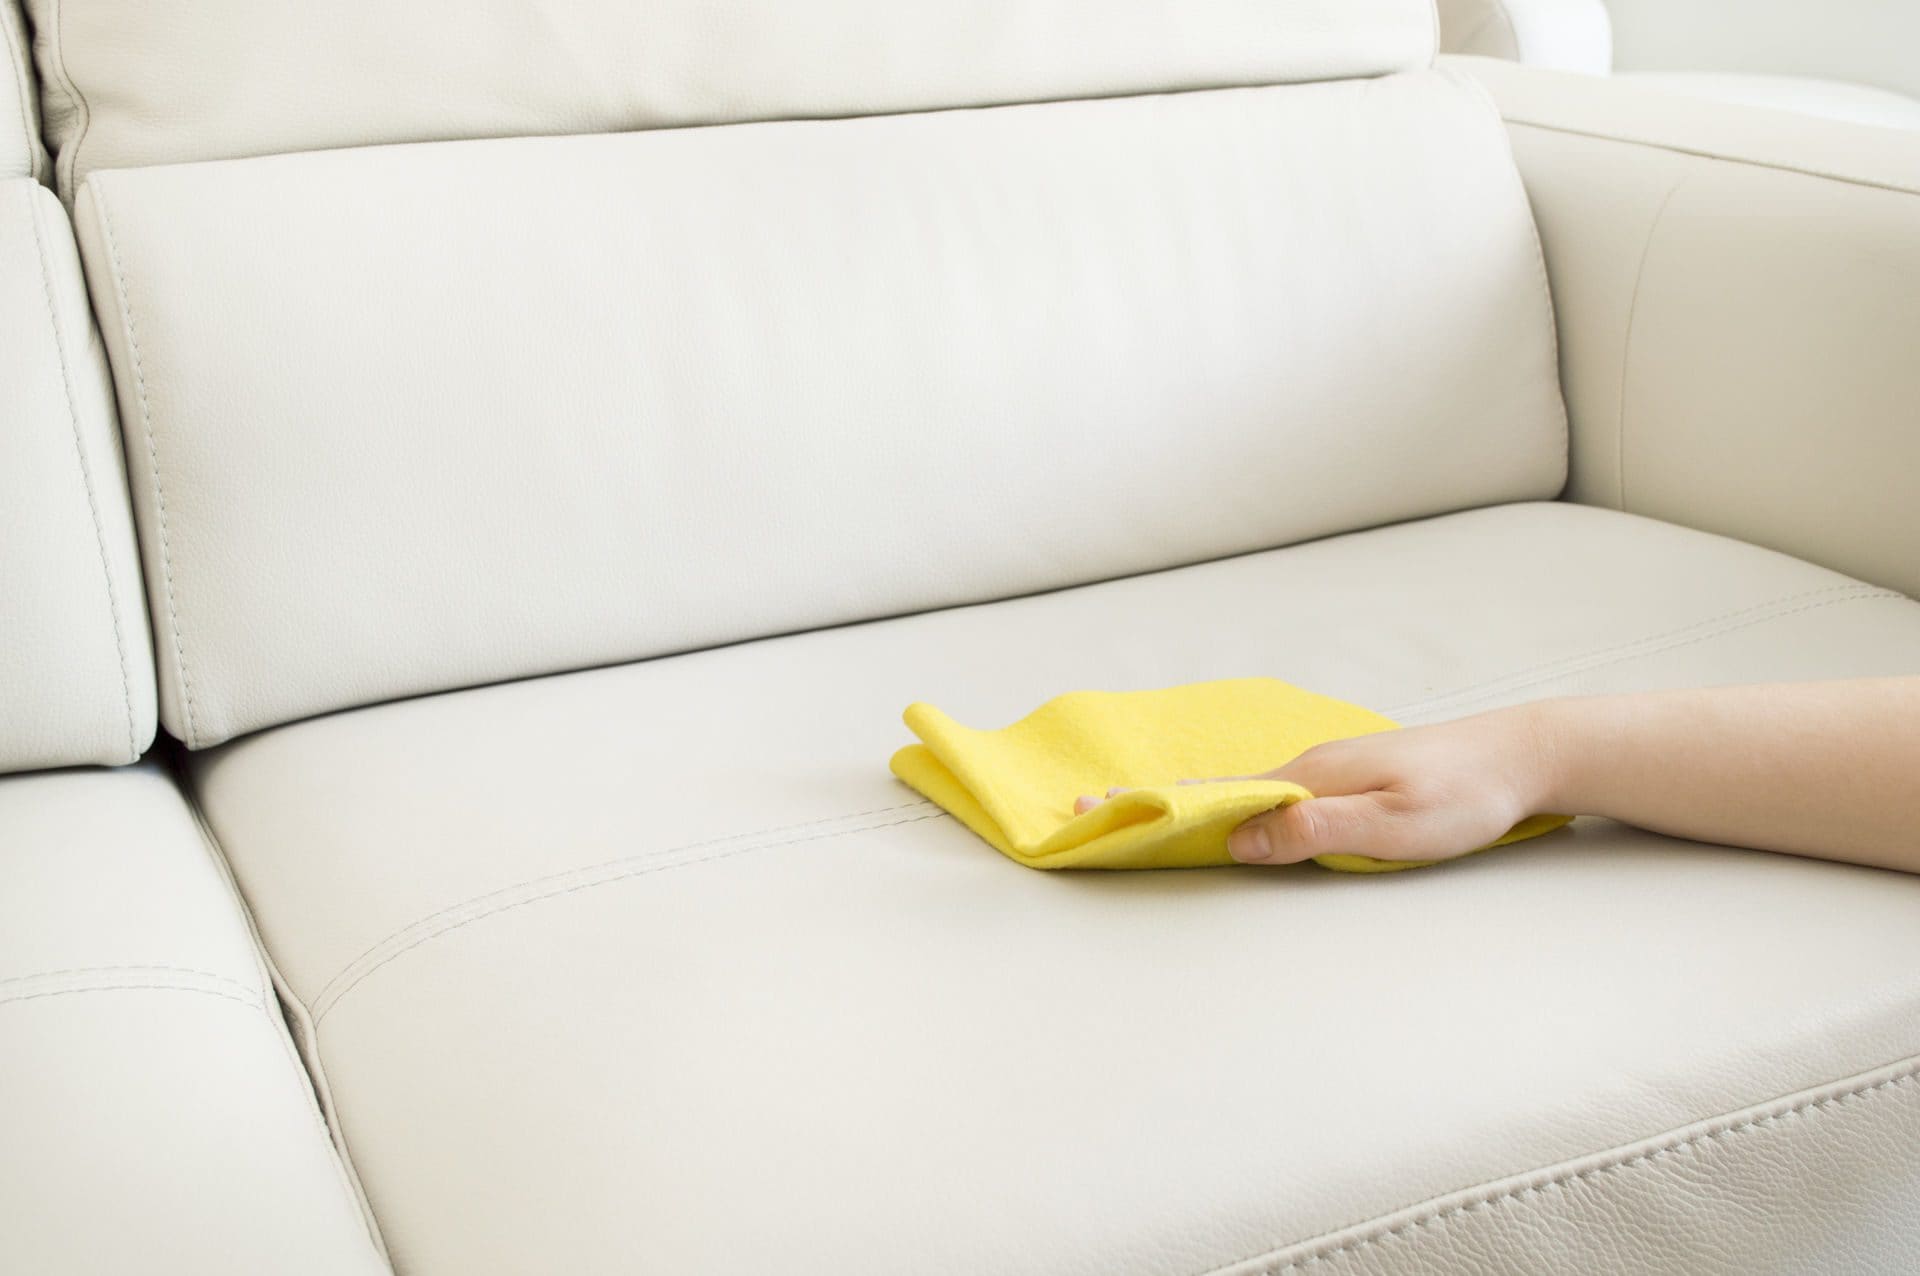 How To Clean Pee Out Of Sofa